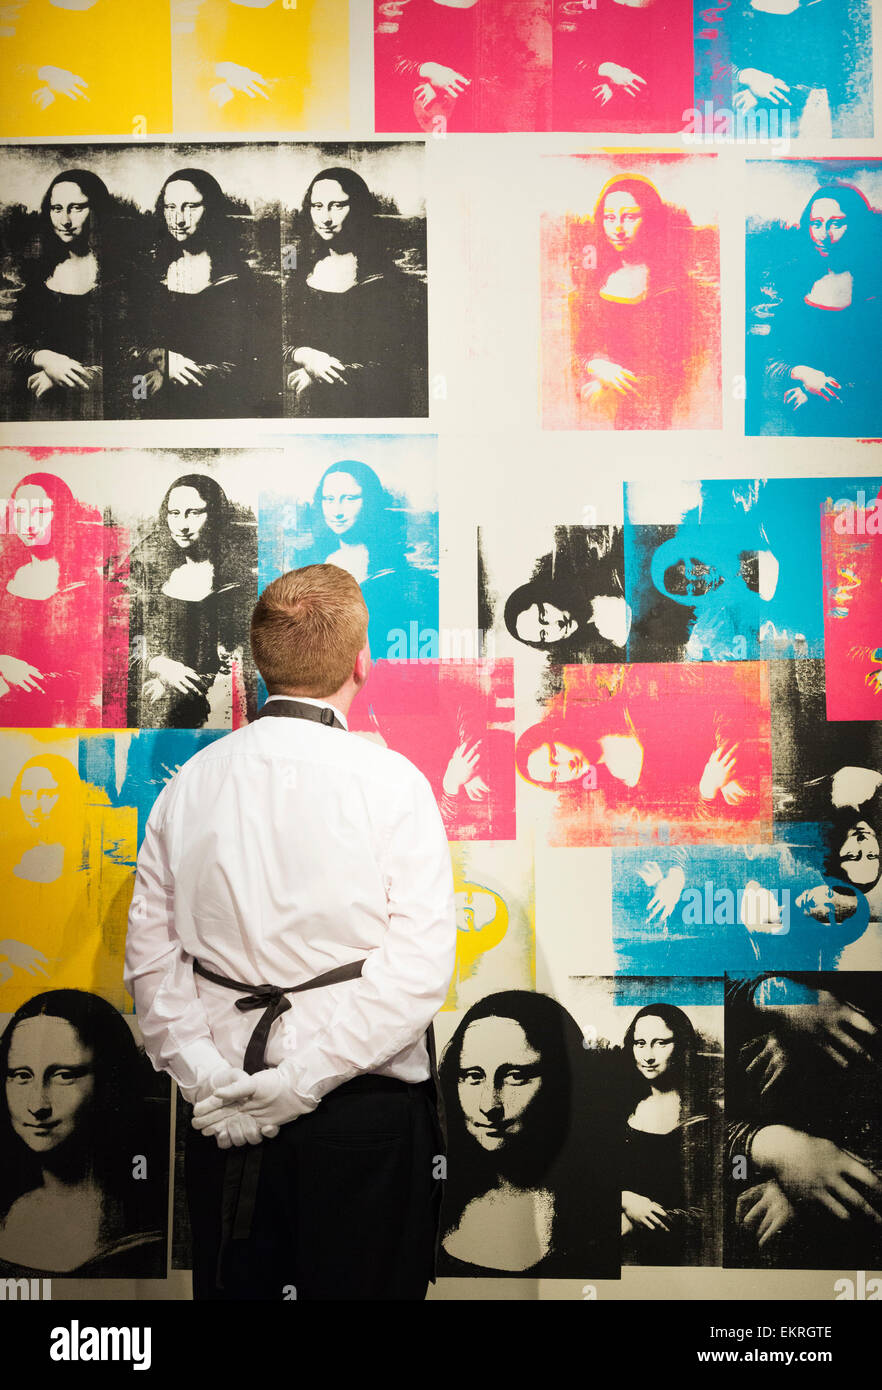 London, UK. 13 April 2015. A Christie's employee looks at the Andy Warhol painting 'Colored Mona Lisa', estimate US-$40m. Christie's showcases a selection of almost fifty works from the spring sales in May in New York of Impressionist, Modern, Post-War And Contemporary Art. Most works will be on view to the public until 15 April at Christie’s King Street, London. Photo: ukartpics/Alamy Live News Stock Photo